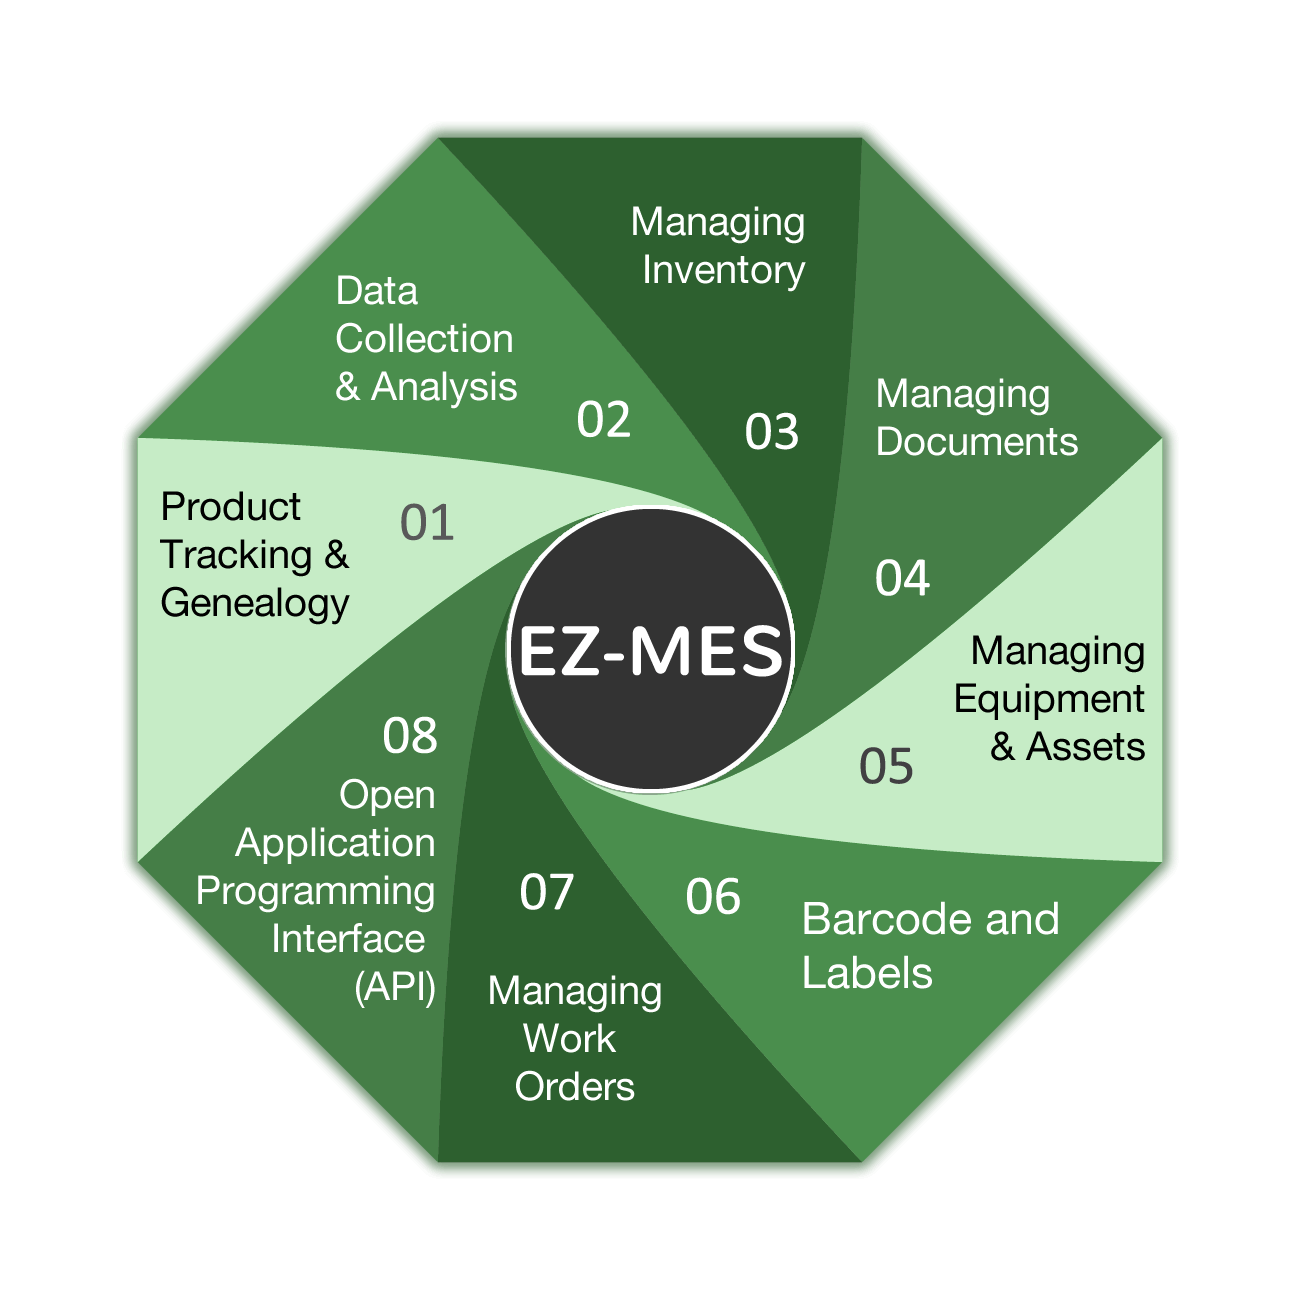 OVERVIEW OF THE MAIN FEATURES OF EZ-MES